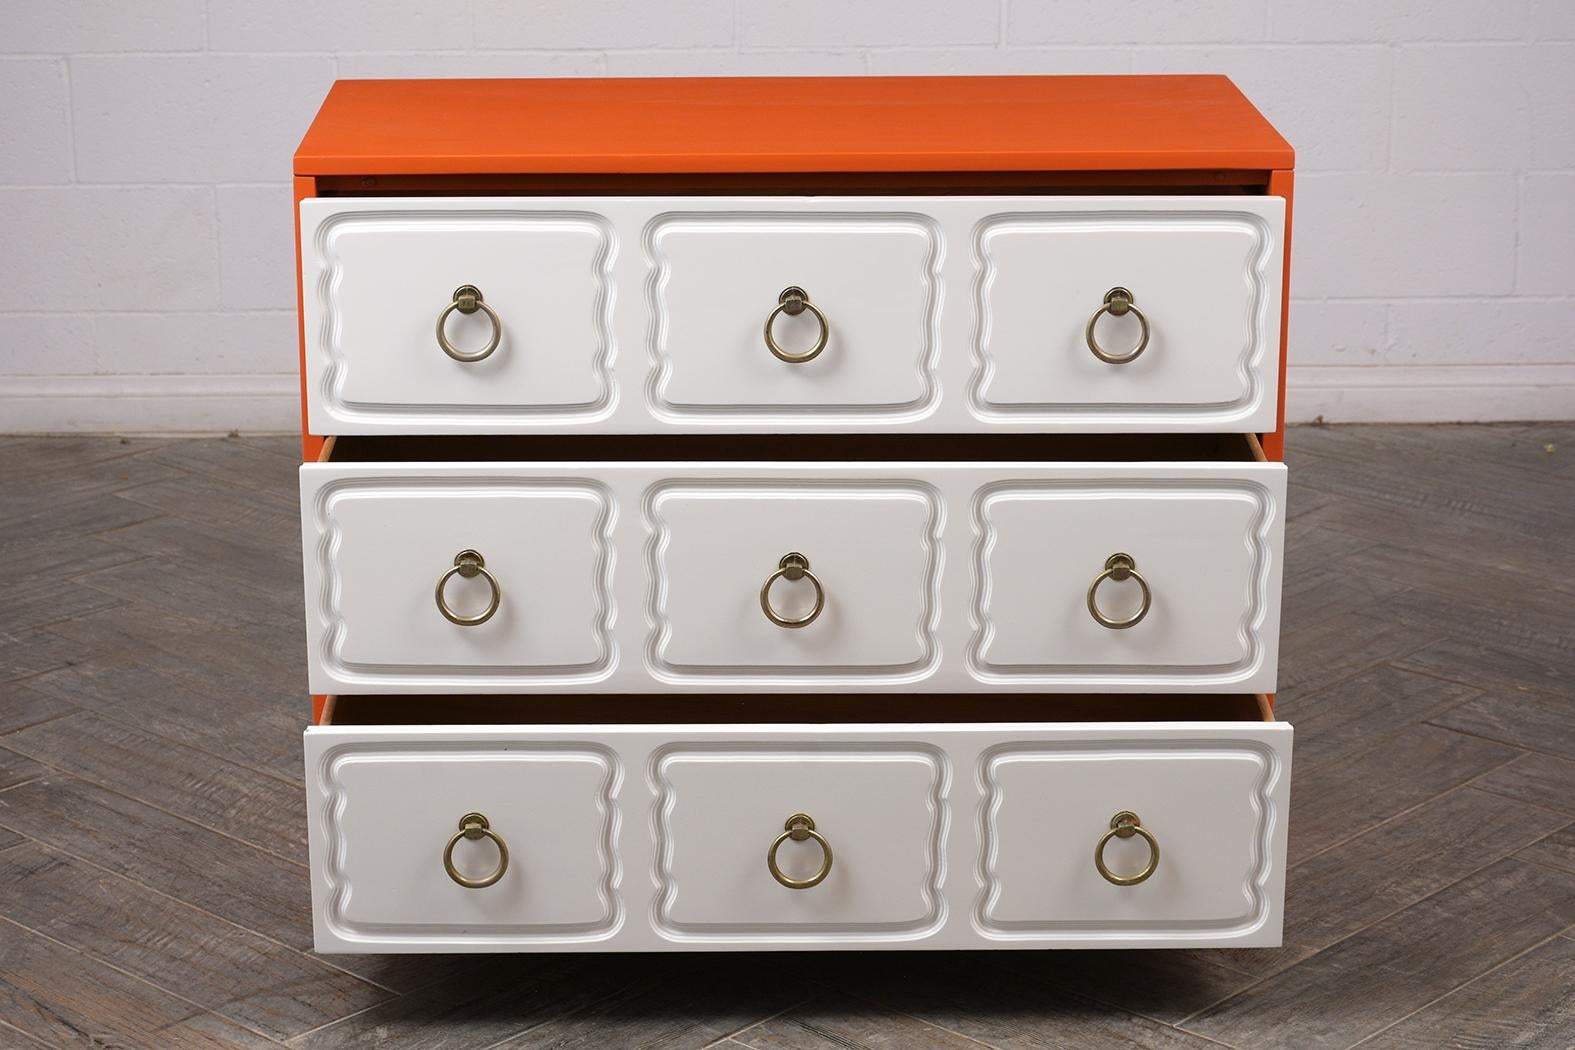 American Three-Drawer Dorothy Draper Style Dresser with Lacquered Finish